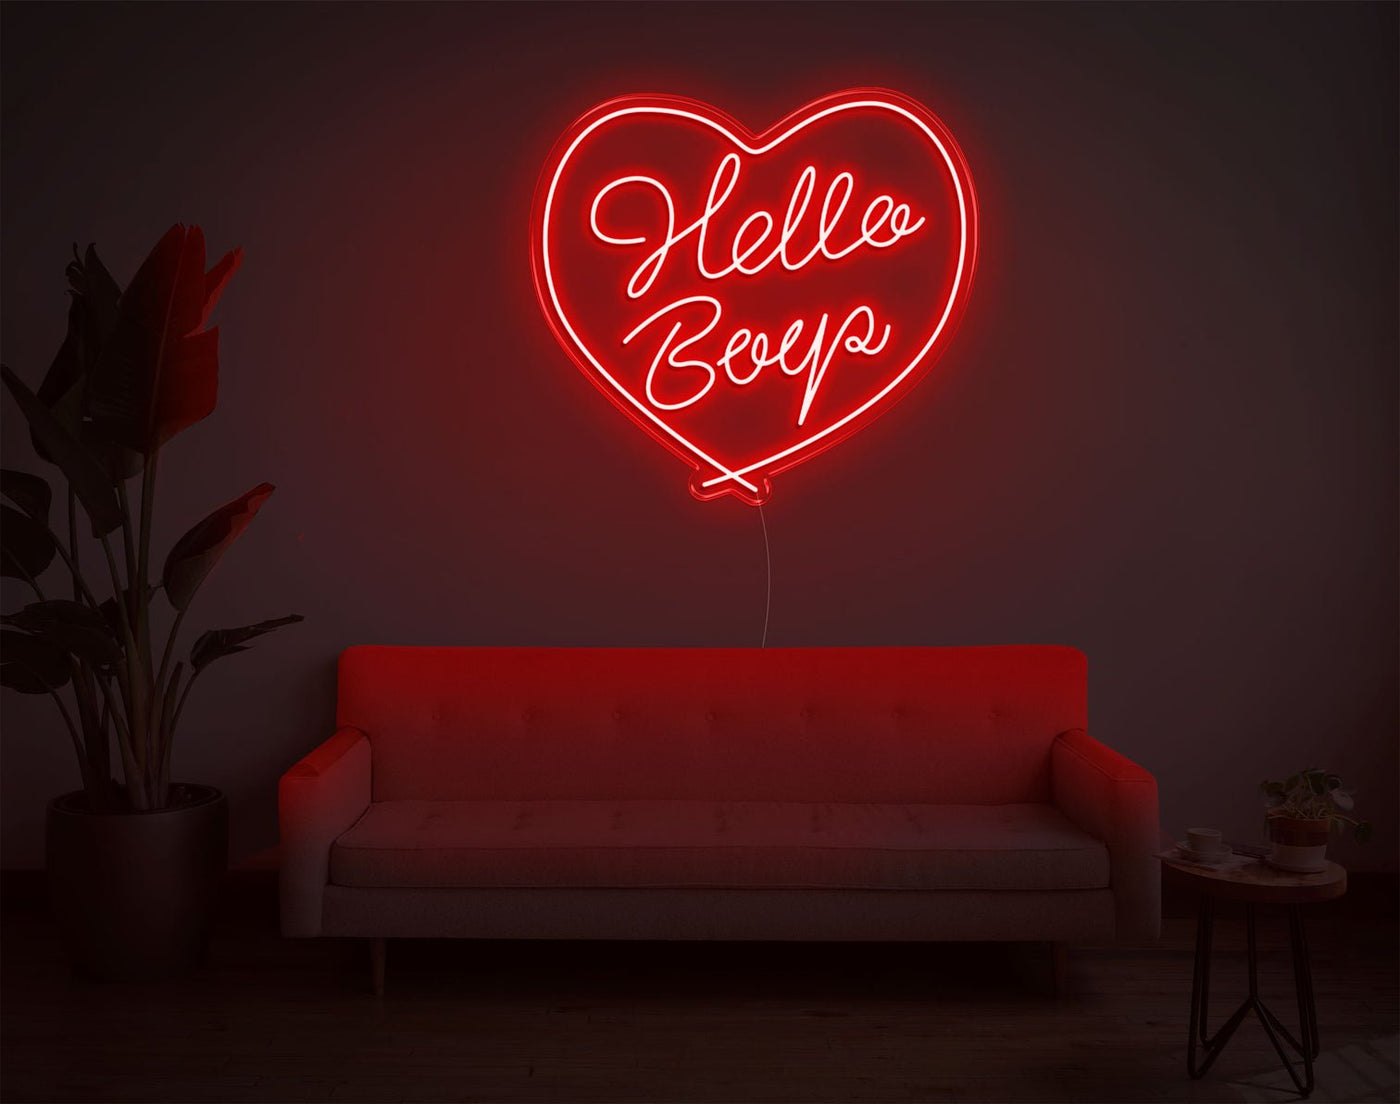 Hello Boys LED Neon Sign - 26inch x 28inchHot Pink